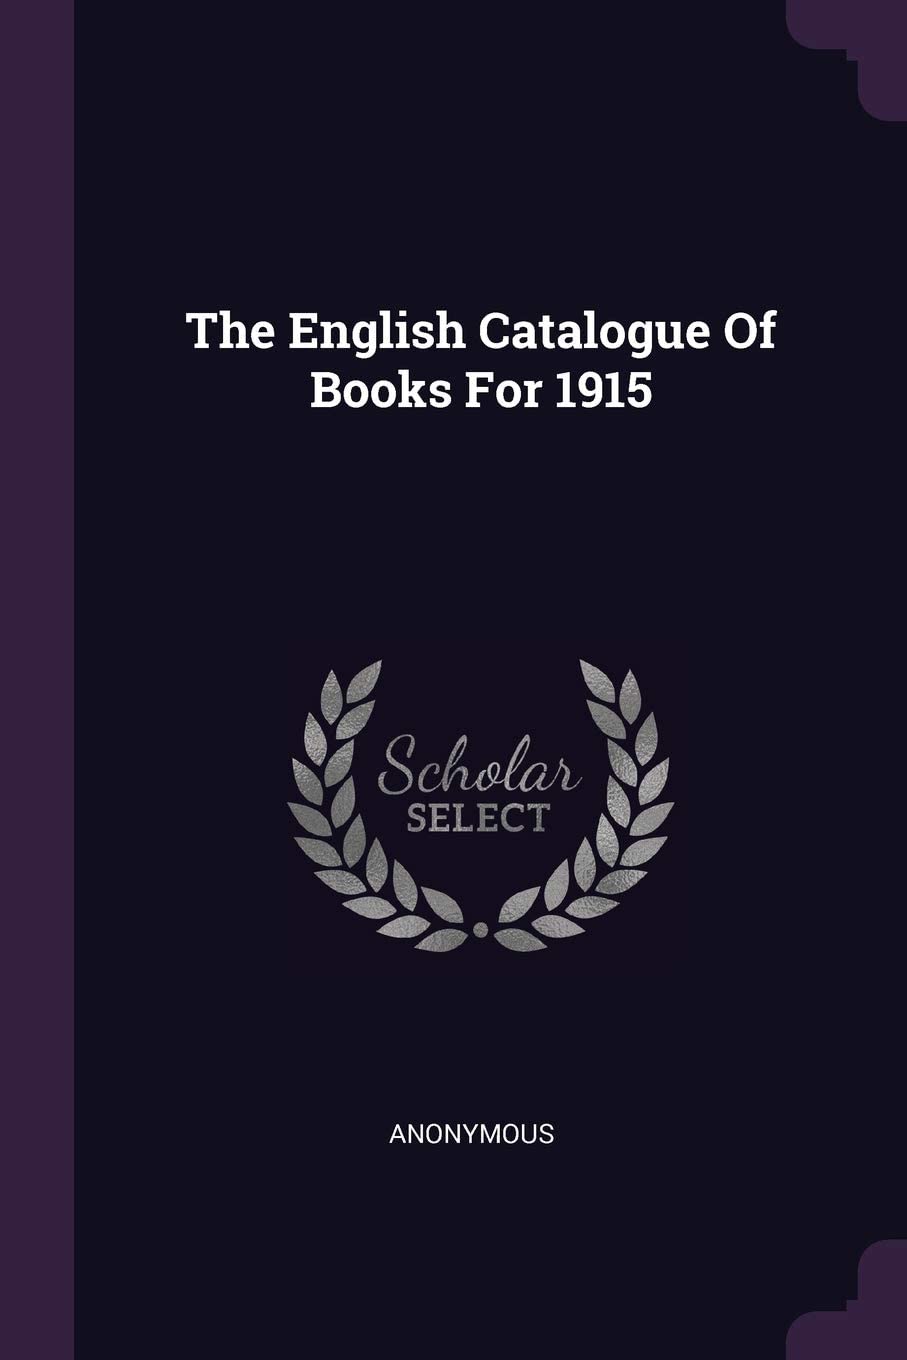 The English Catalogue Of Books For 1915